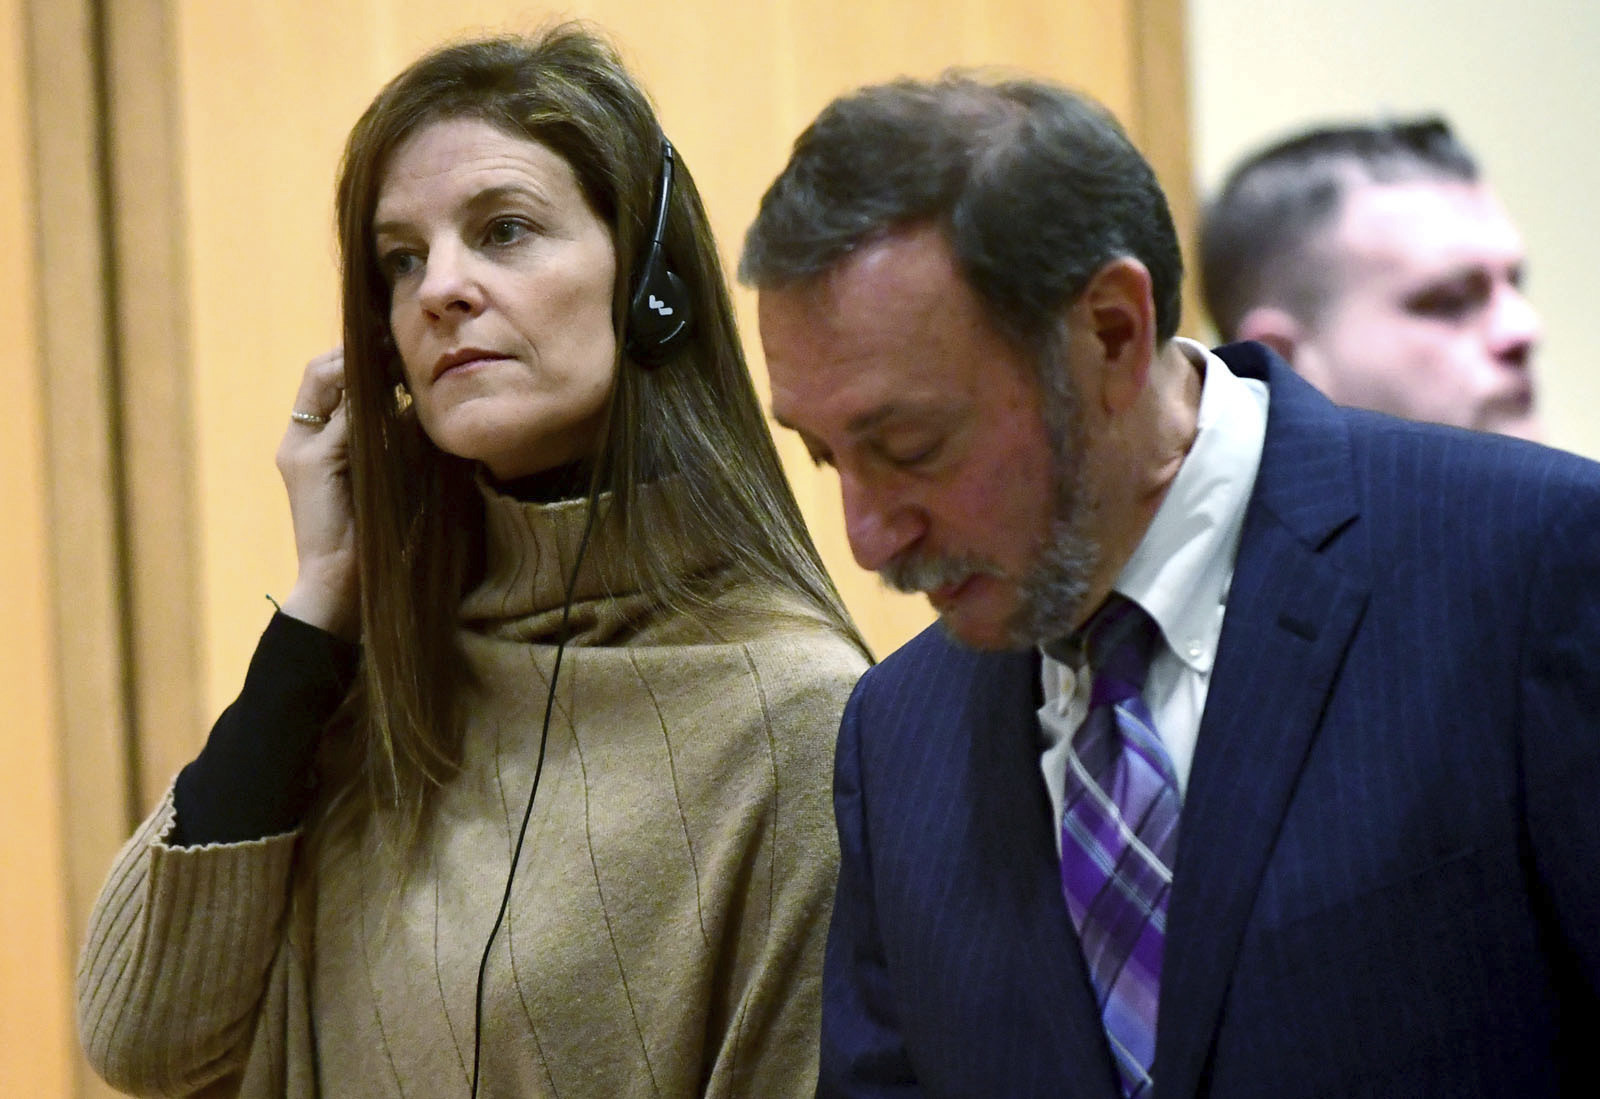 PHOTO: Michelle Troconis, charged with conspiracy to commit murder in the disappearance of Jennifer Dulos, appears for a pre-trial hearing on Feb.  6, 2020, at the Stamford Superior Court in Stamford, Conn.